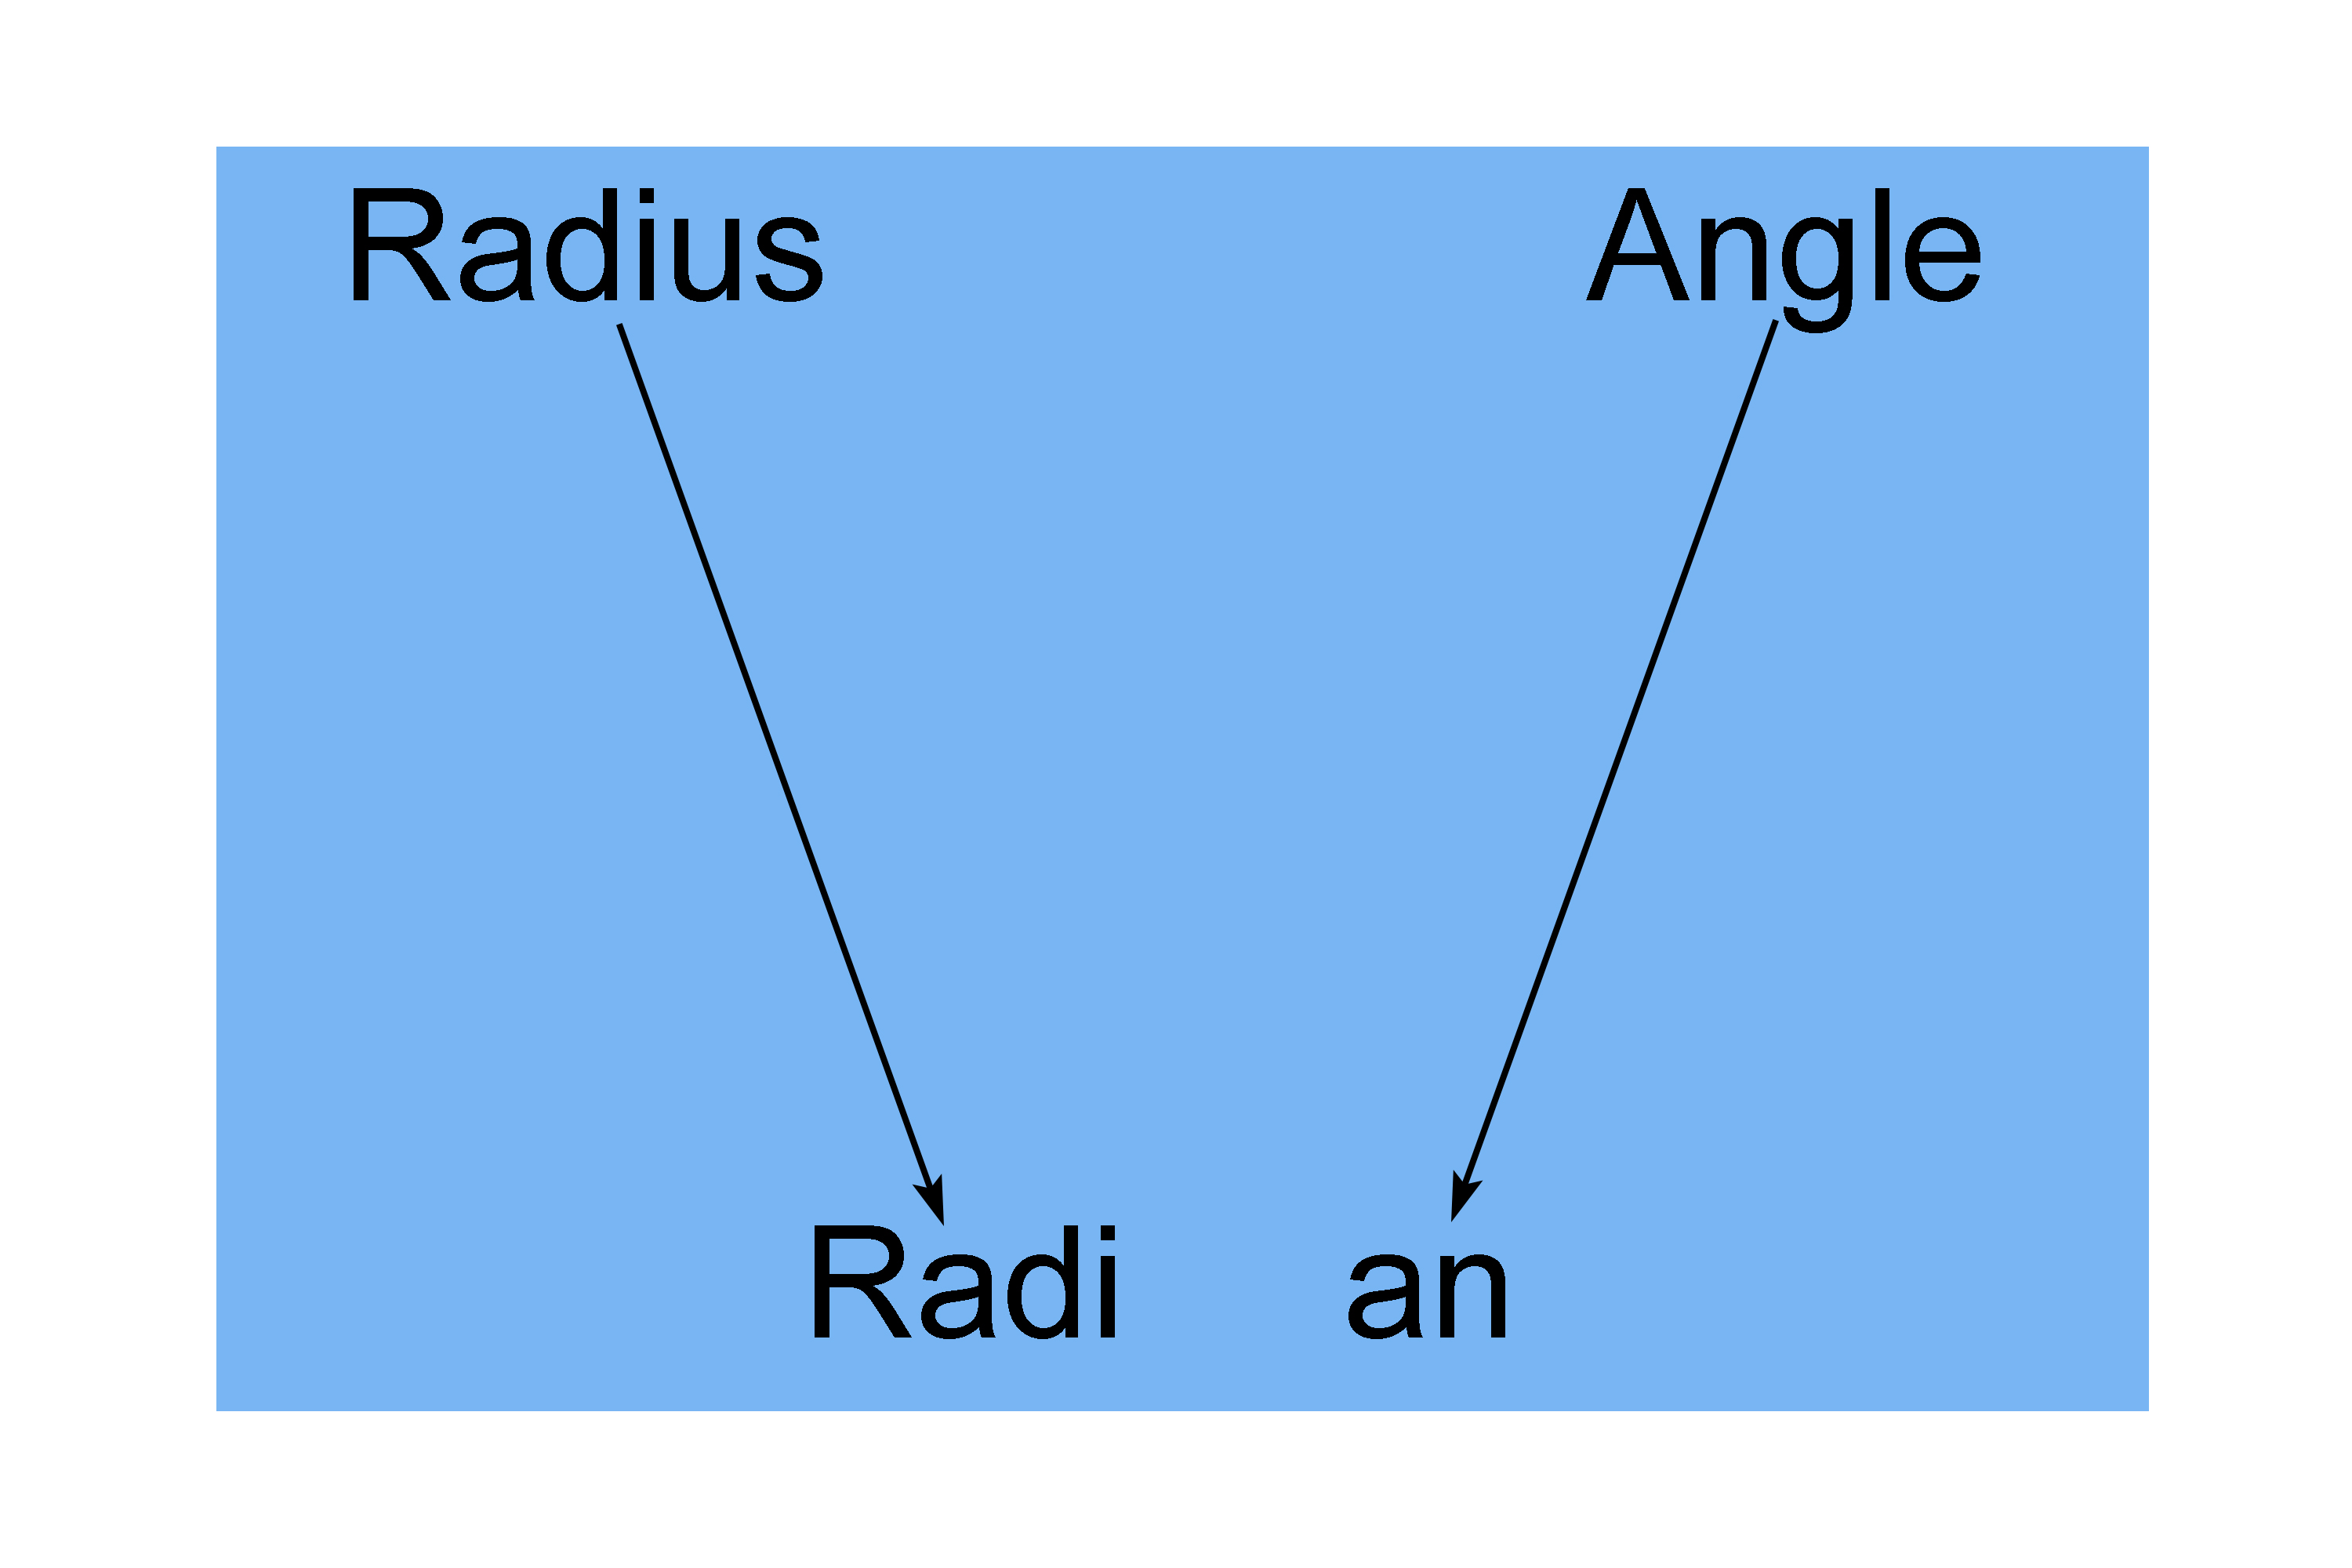 Radian is the angle made when the radius is wrapped around a circle